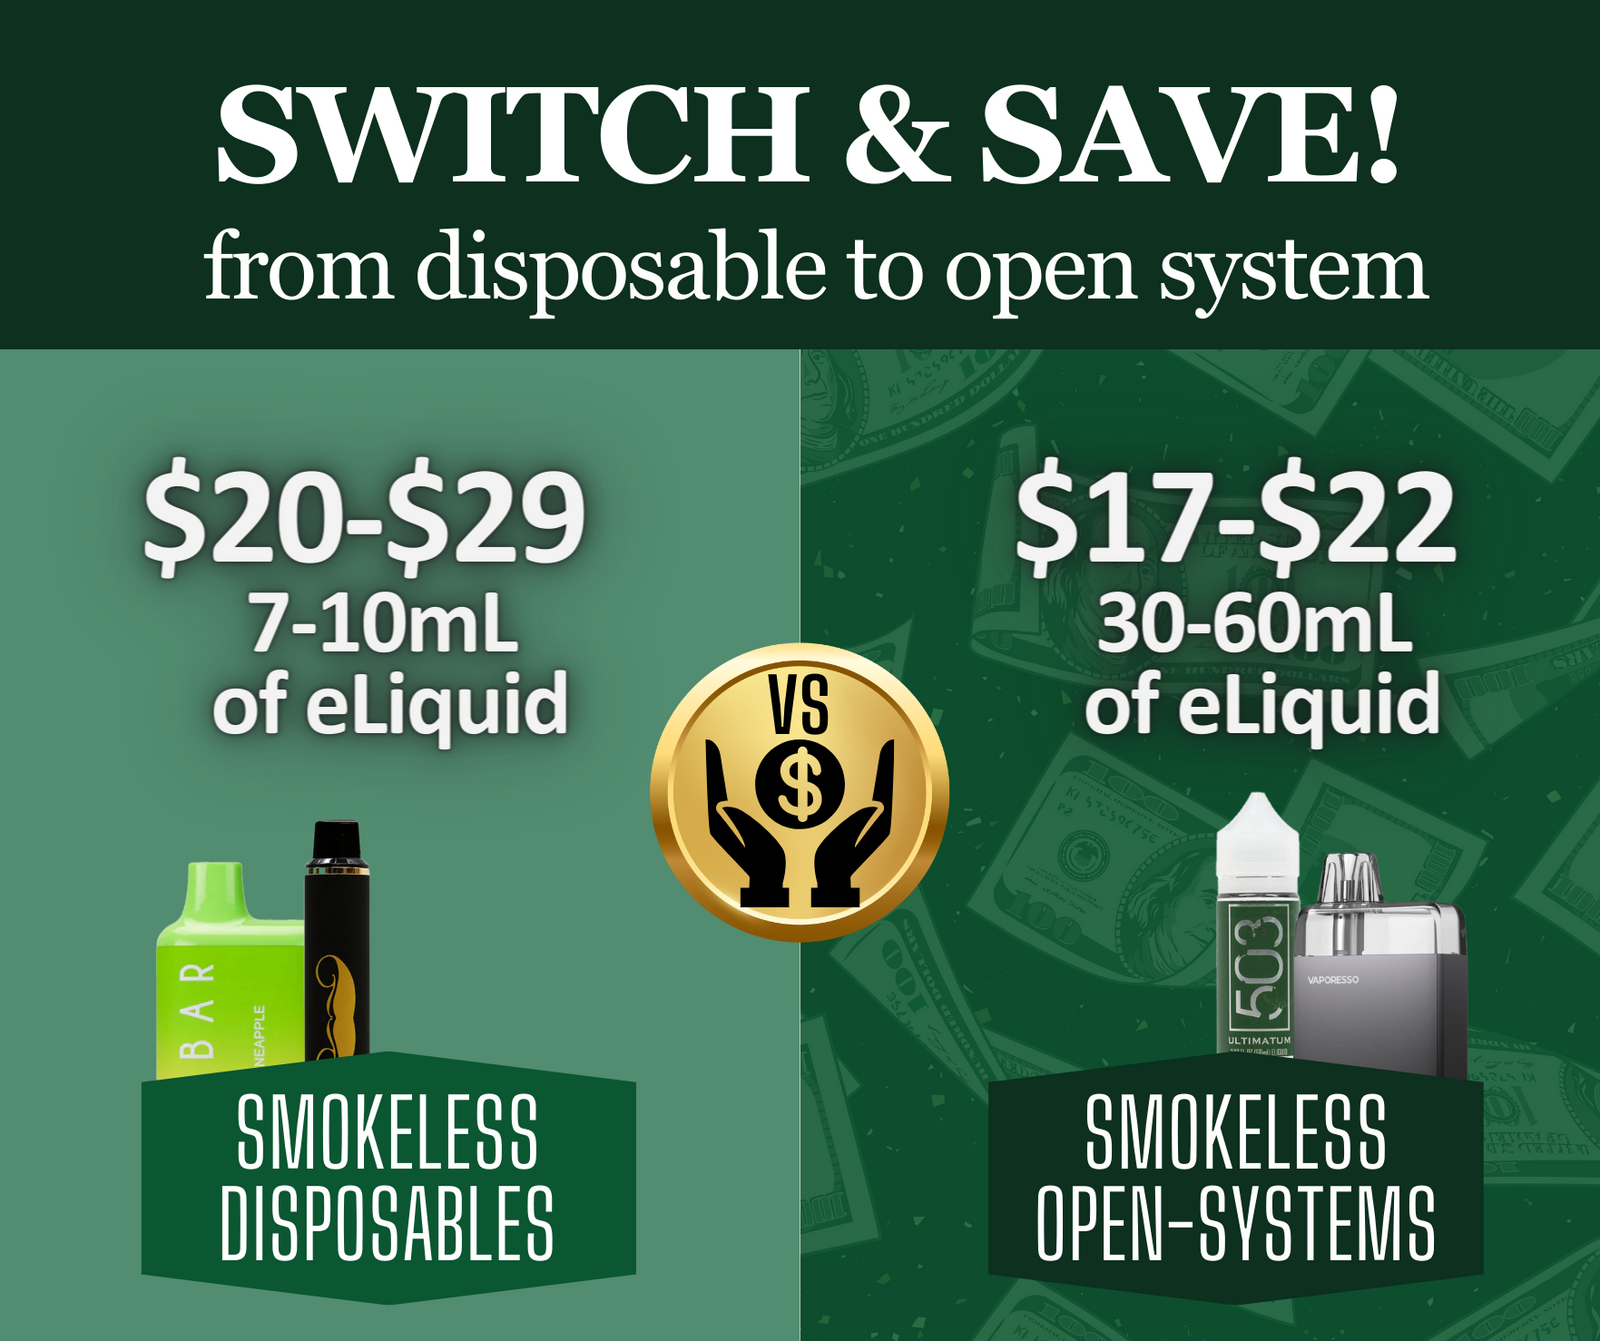 Make the Switch to Open System Vapes and Save Big